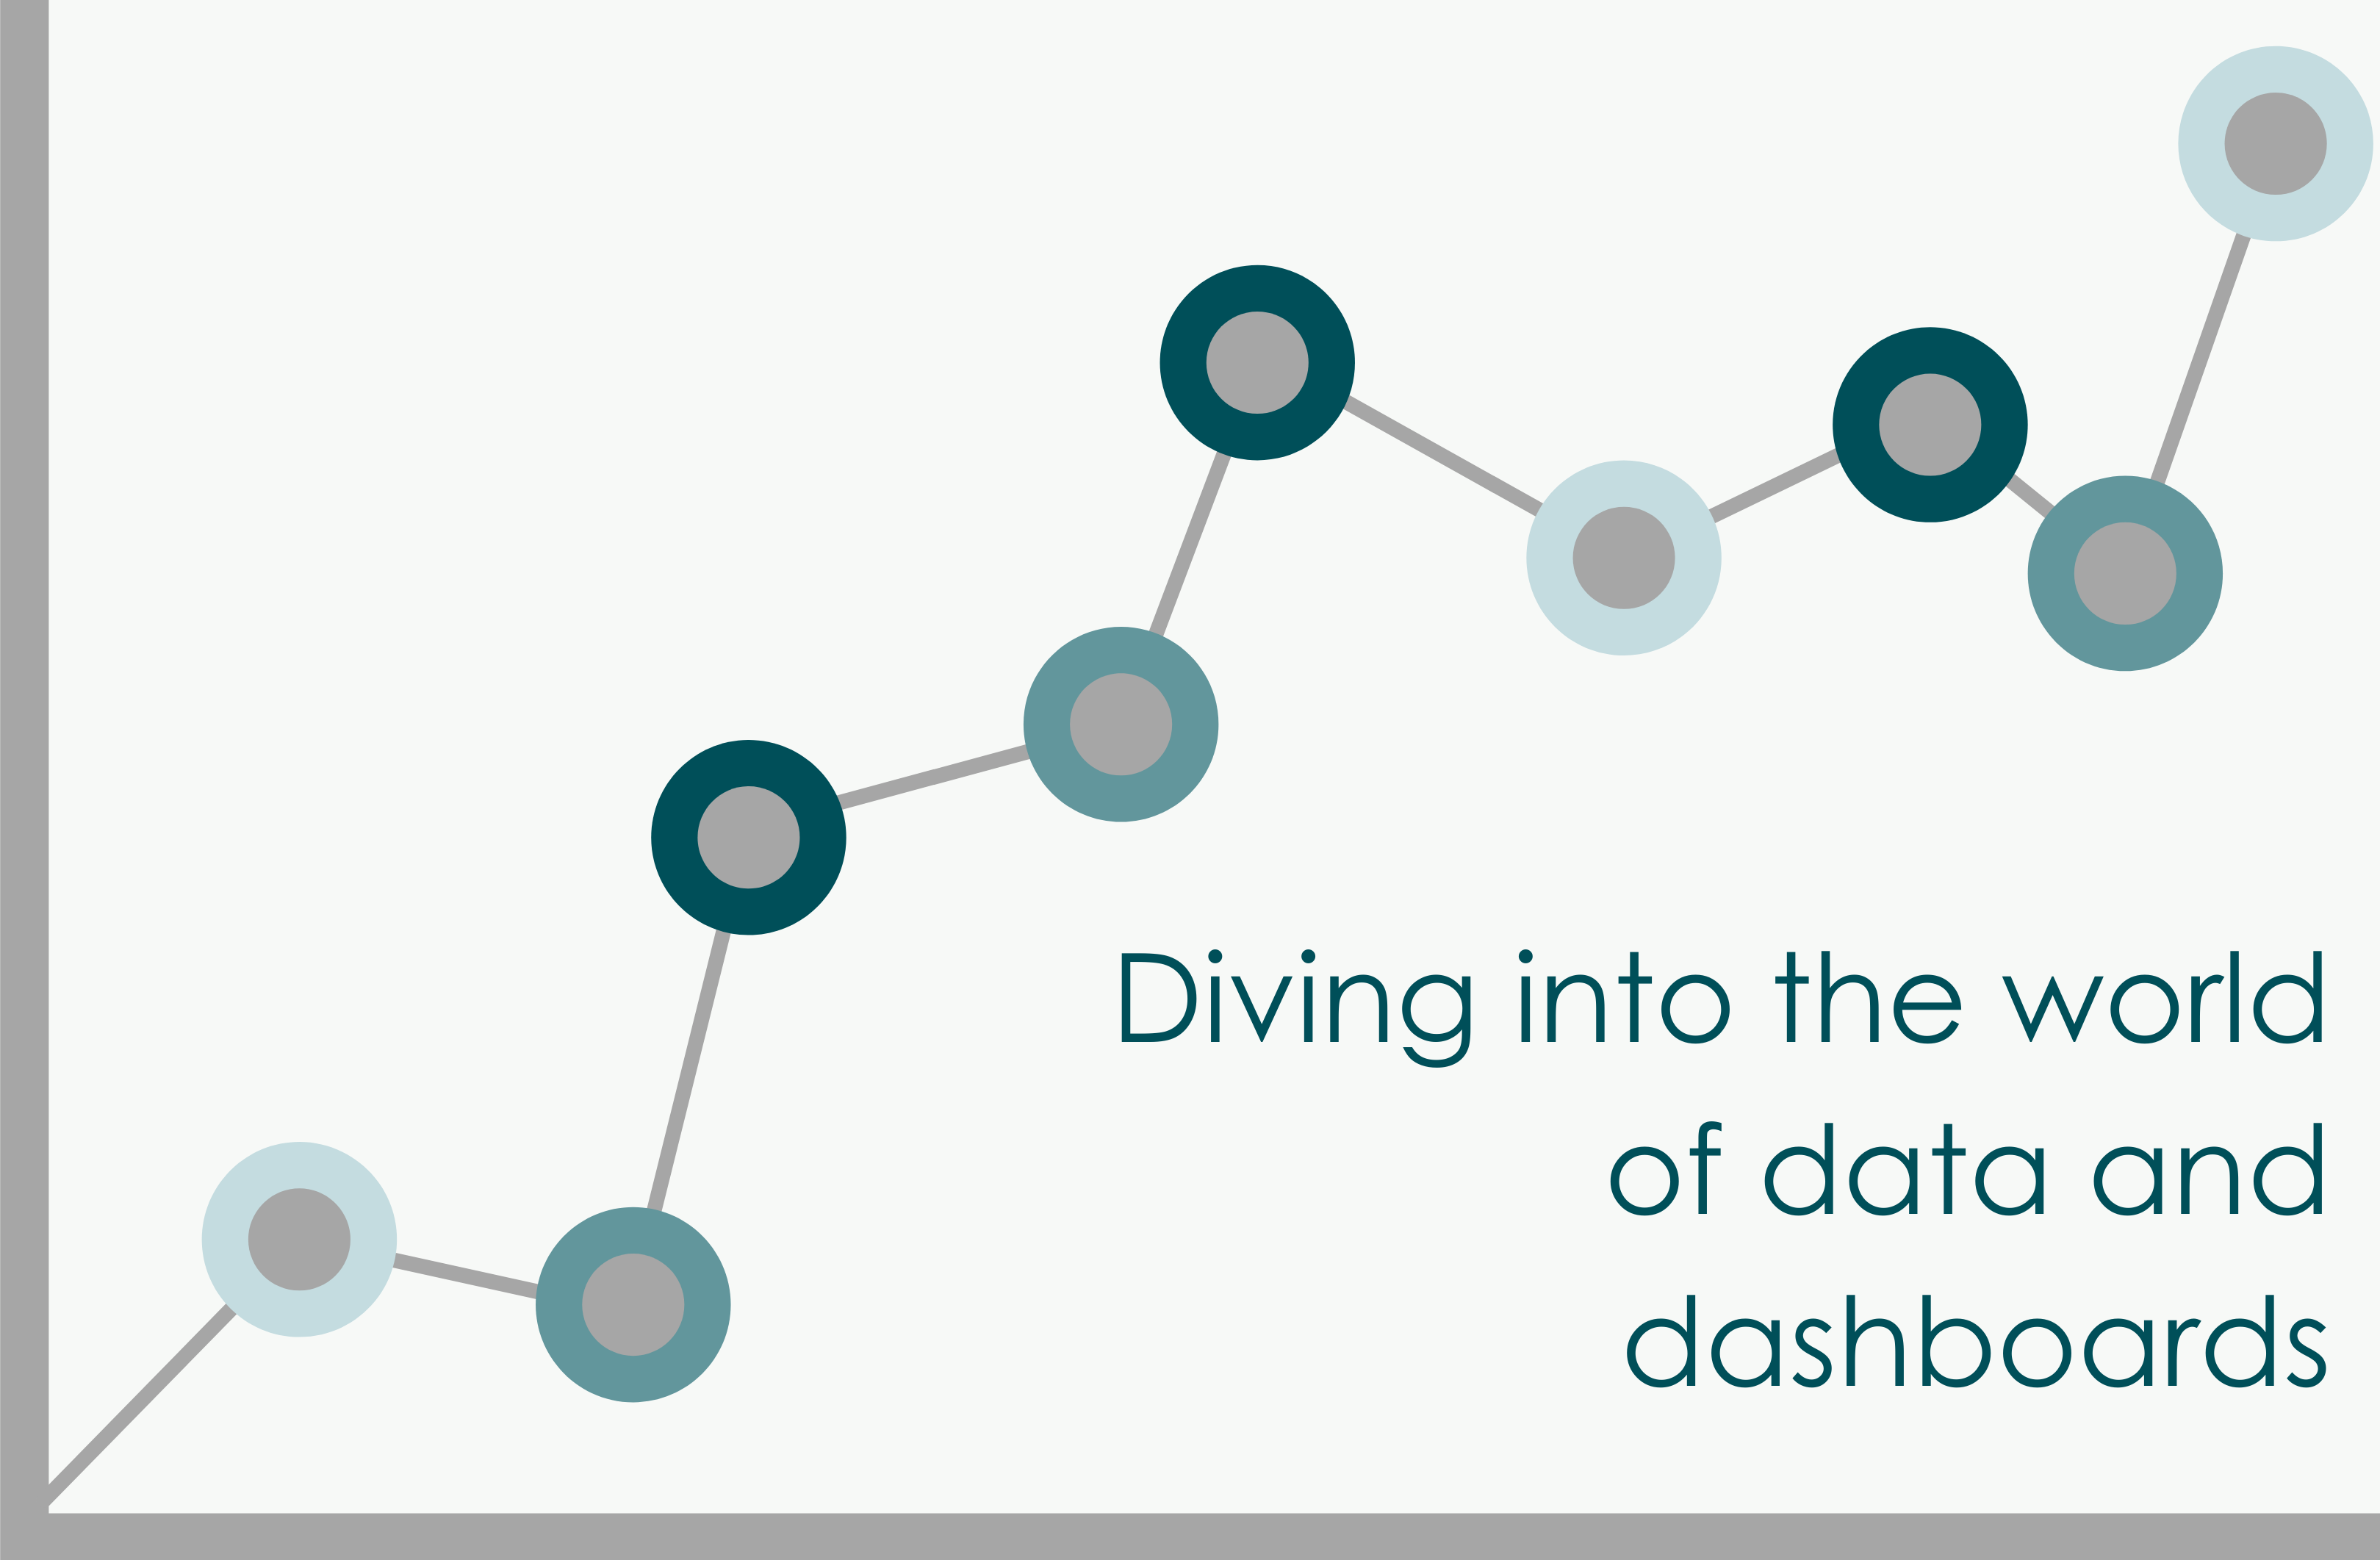 The benefits of dashboards